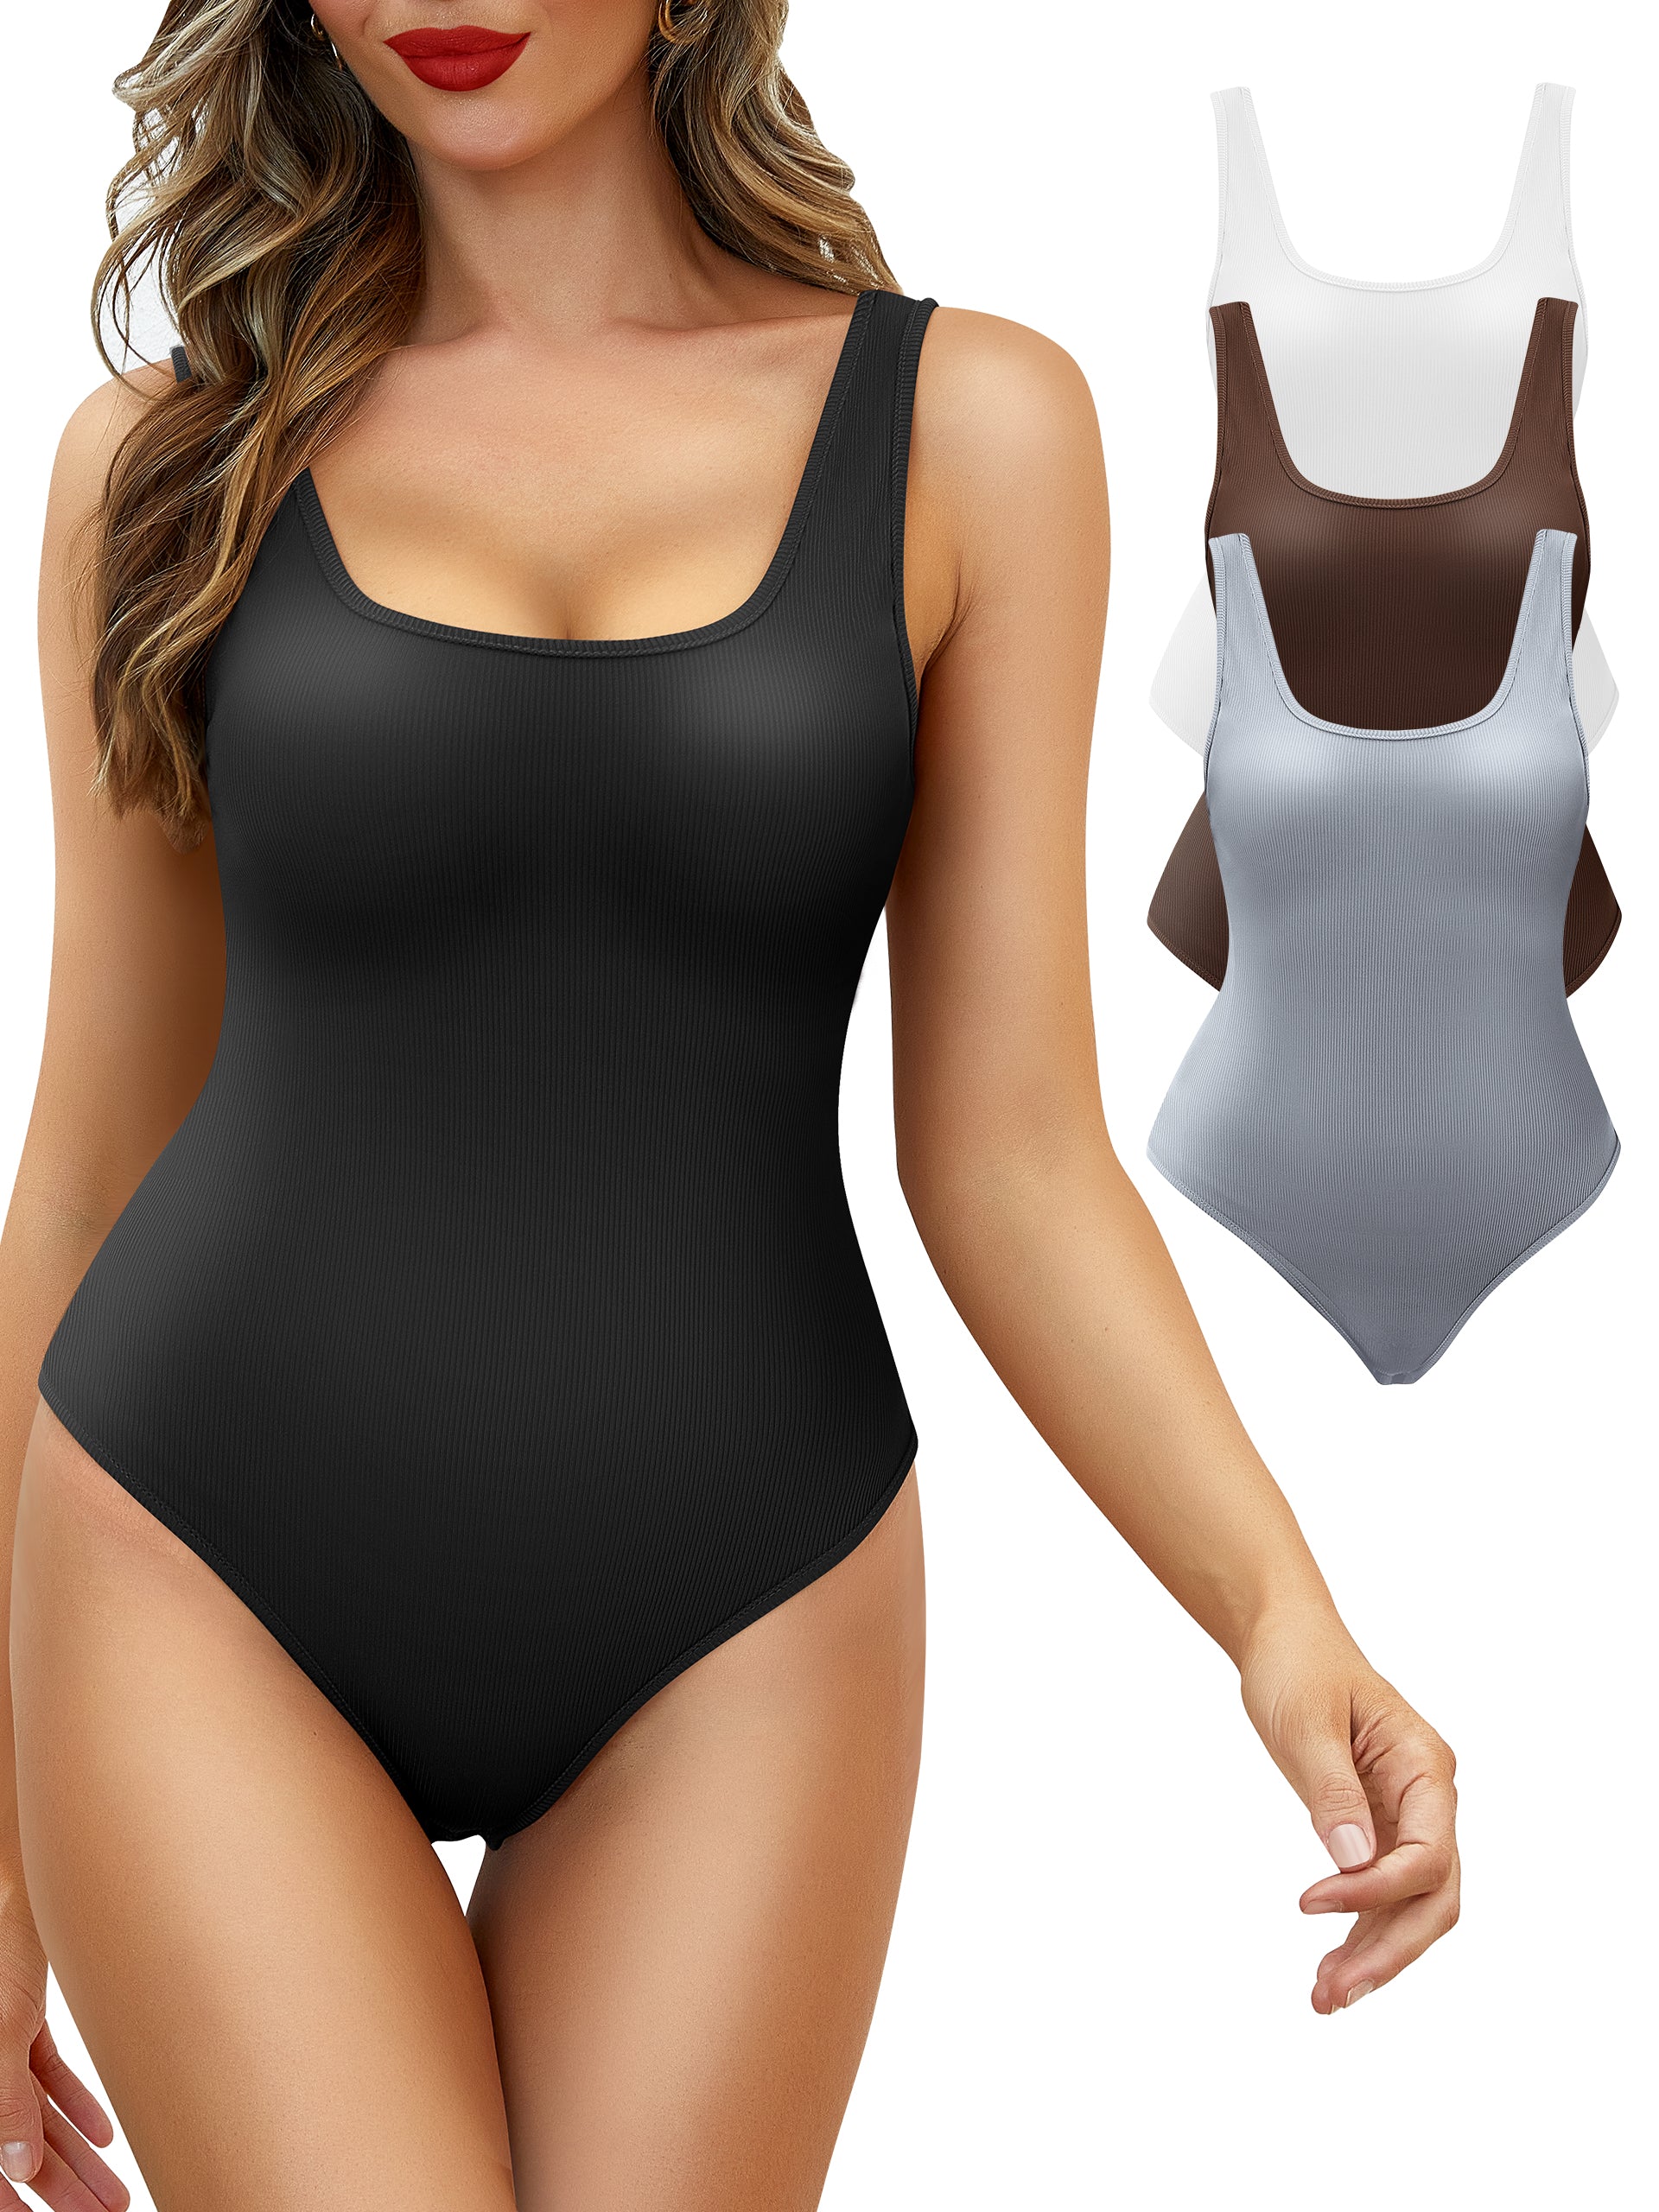 Charmma: Trendy Bodysuits for Women - Casual to Party Styles